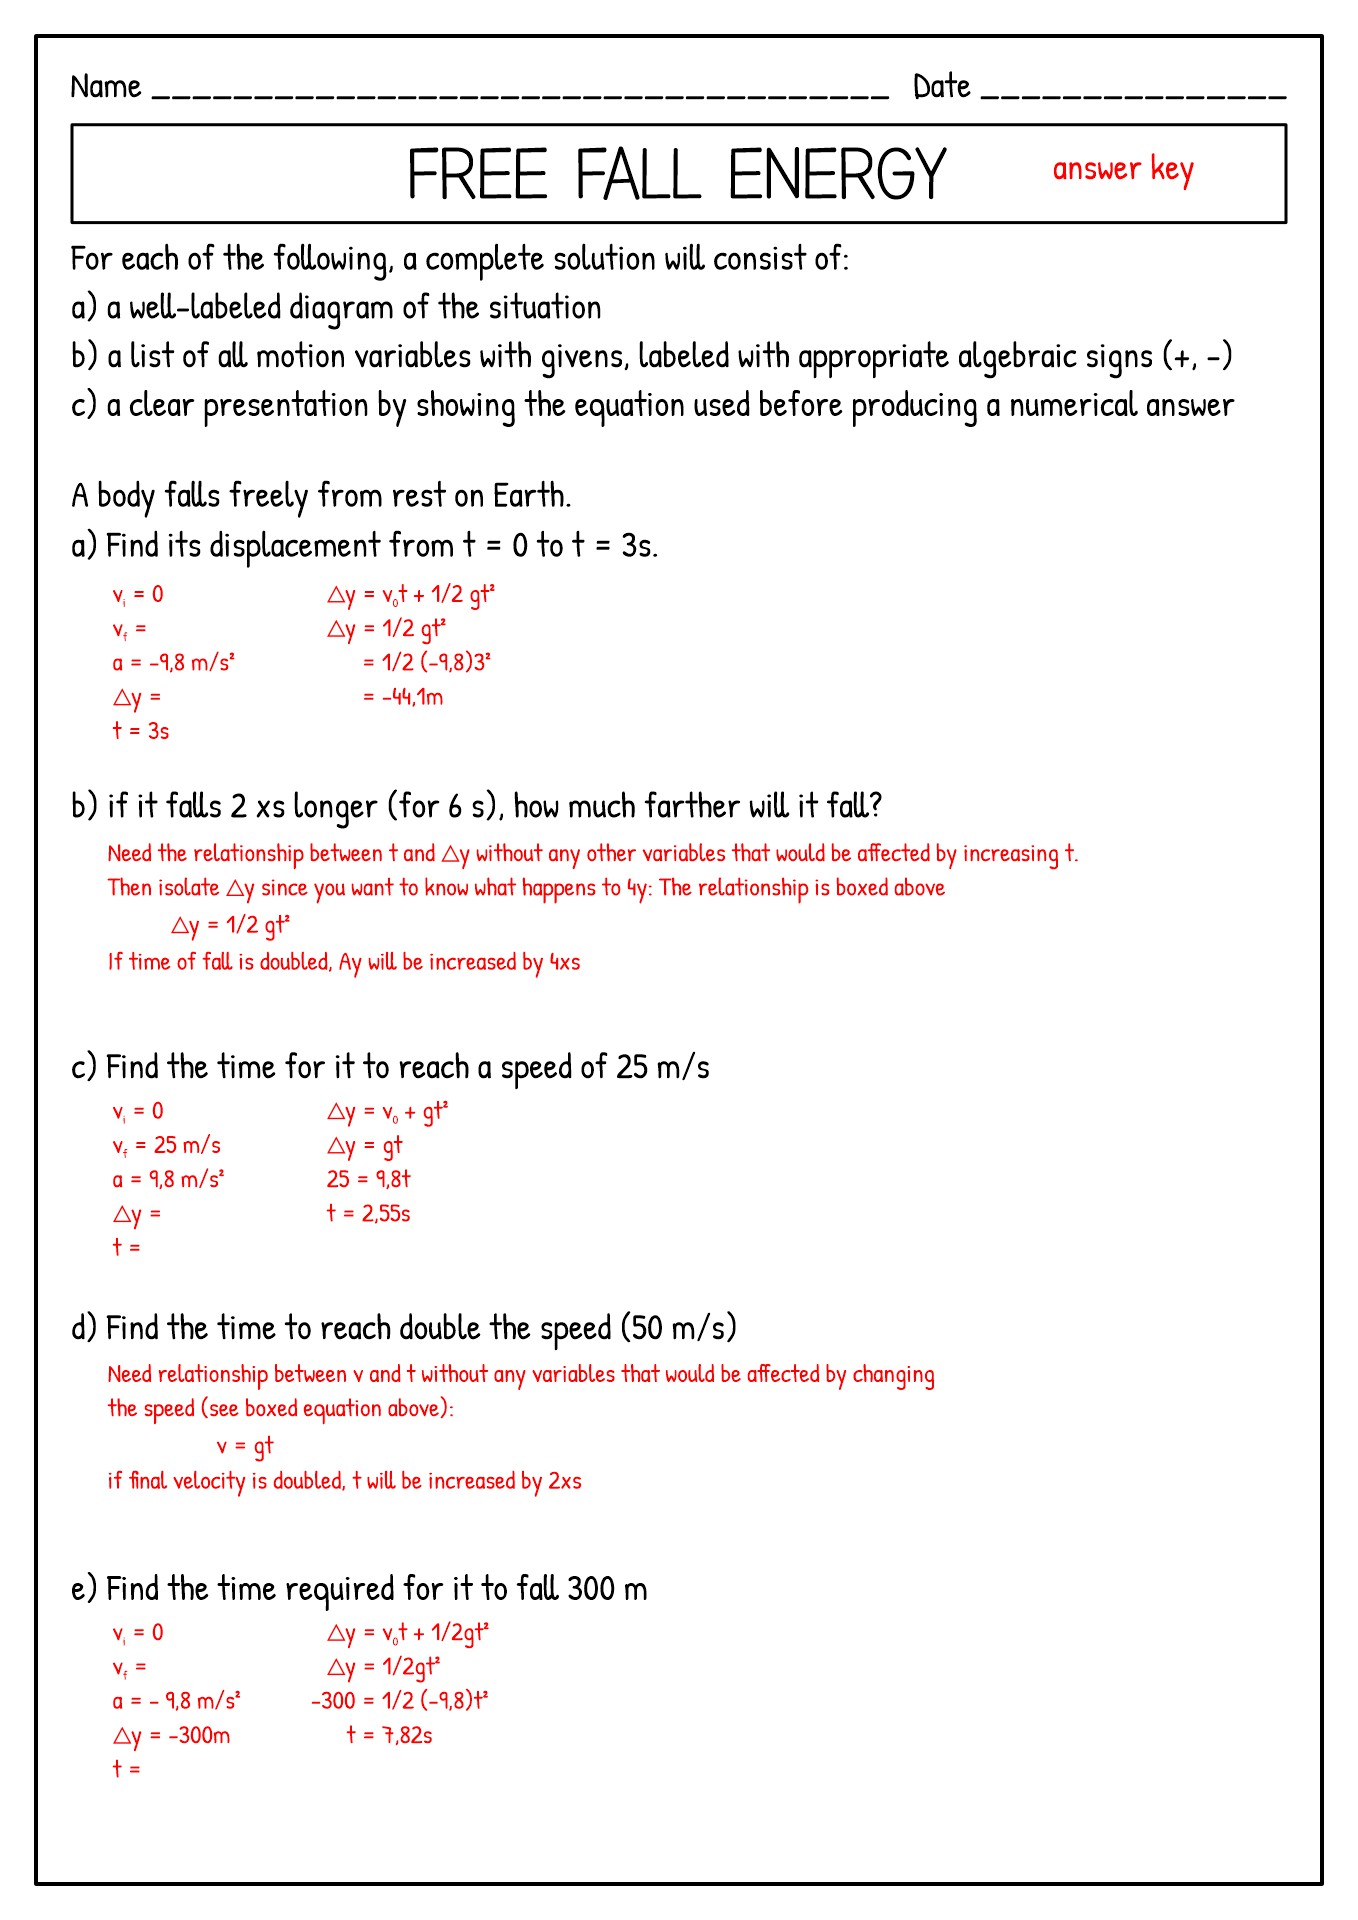 Free Fall Physics Problems Answers Worksheet Image